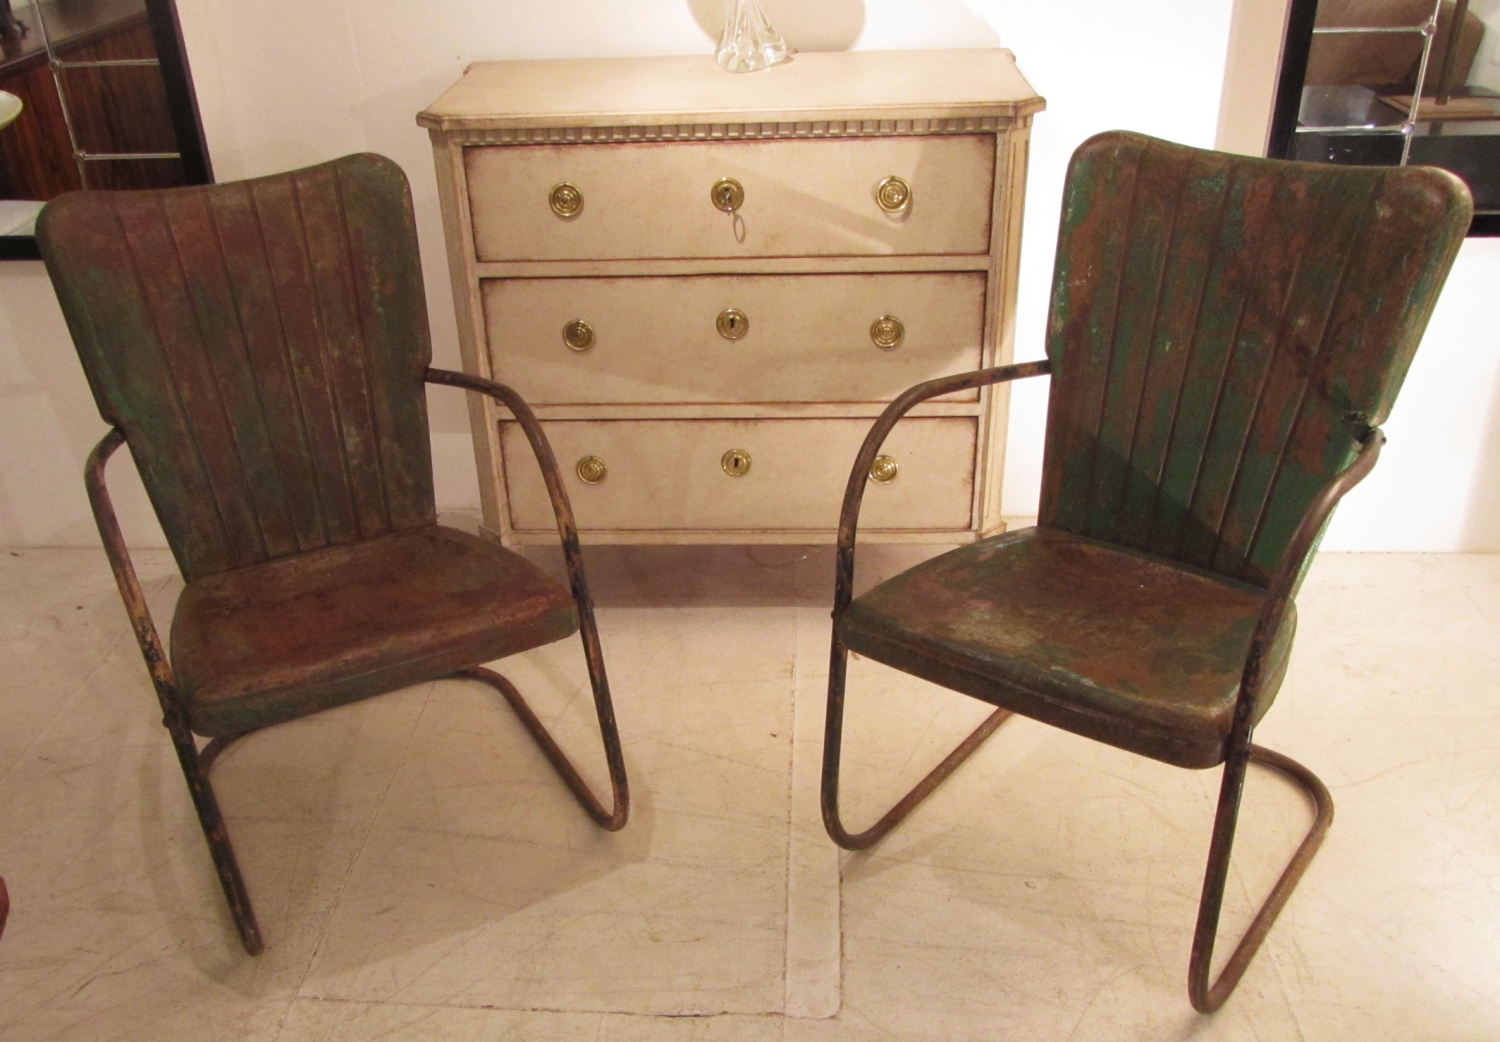 A pair of iron cafe chairs